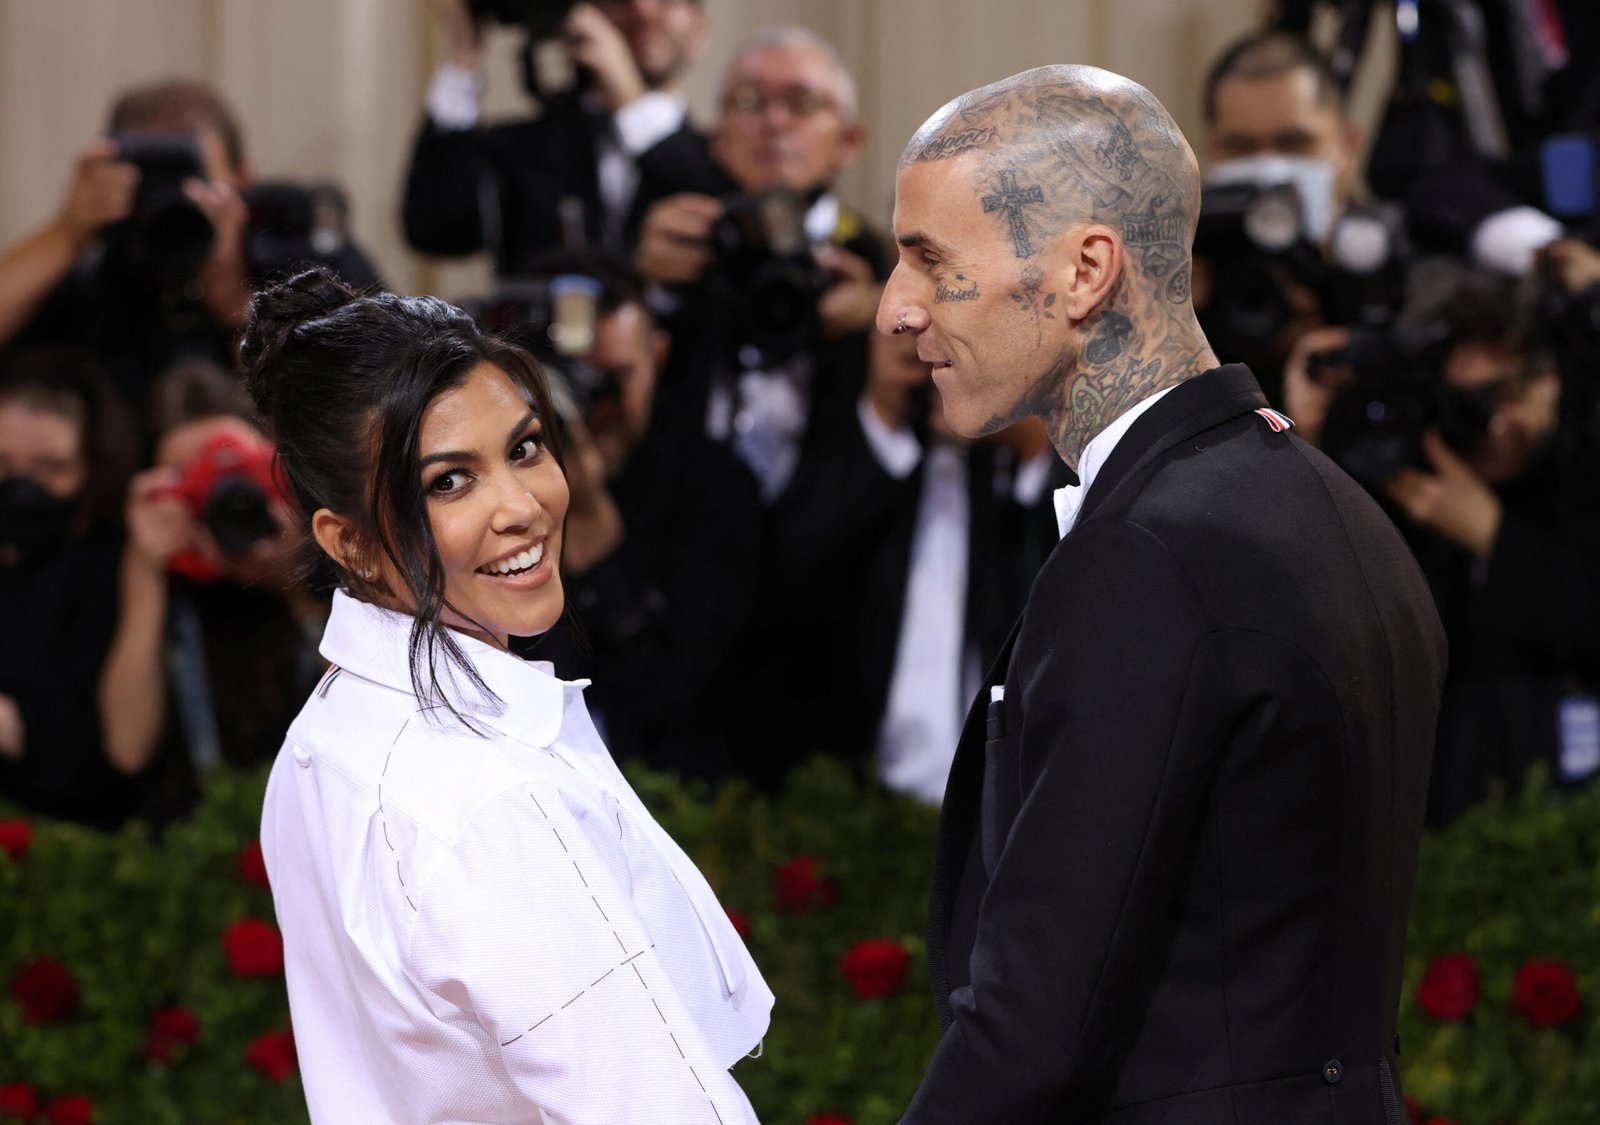 kourtney-kardashian-and-travis-barker-welcome-first-child-together,-reports-say